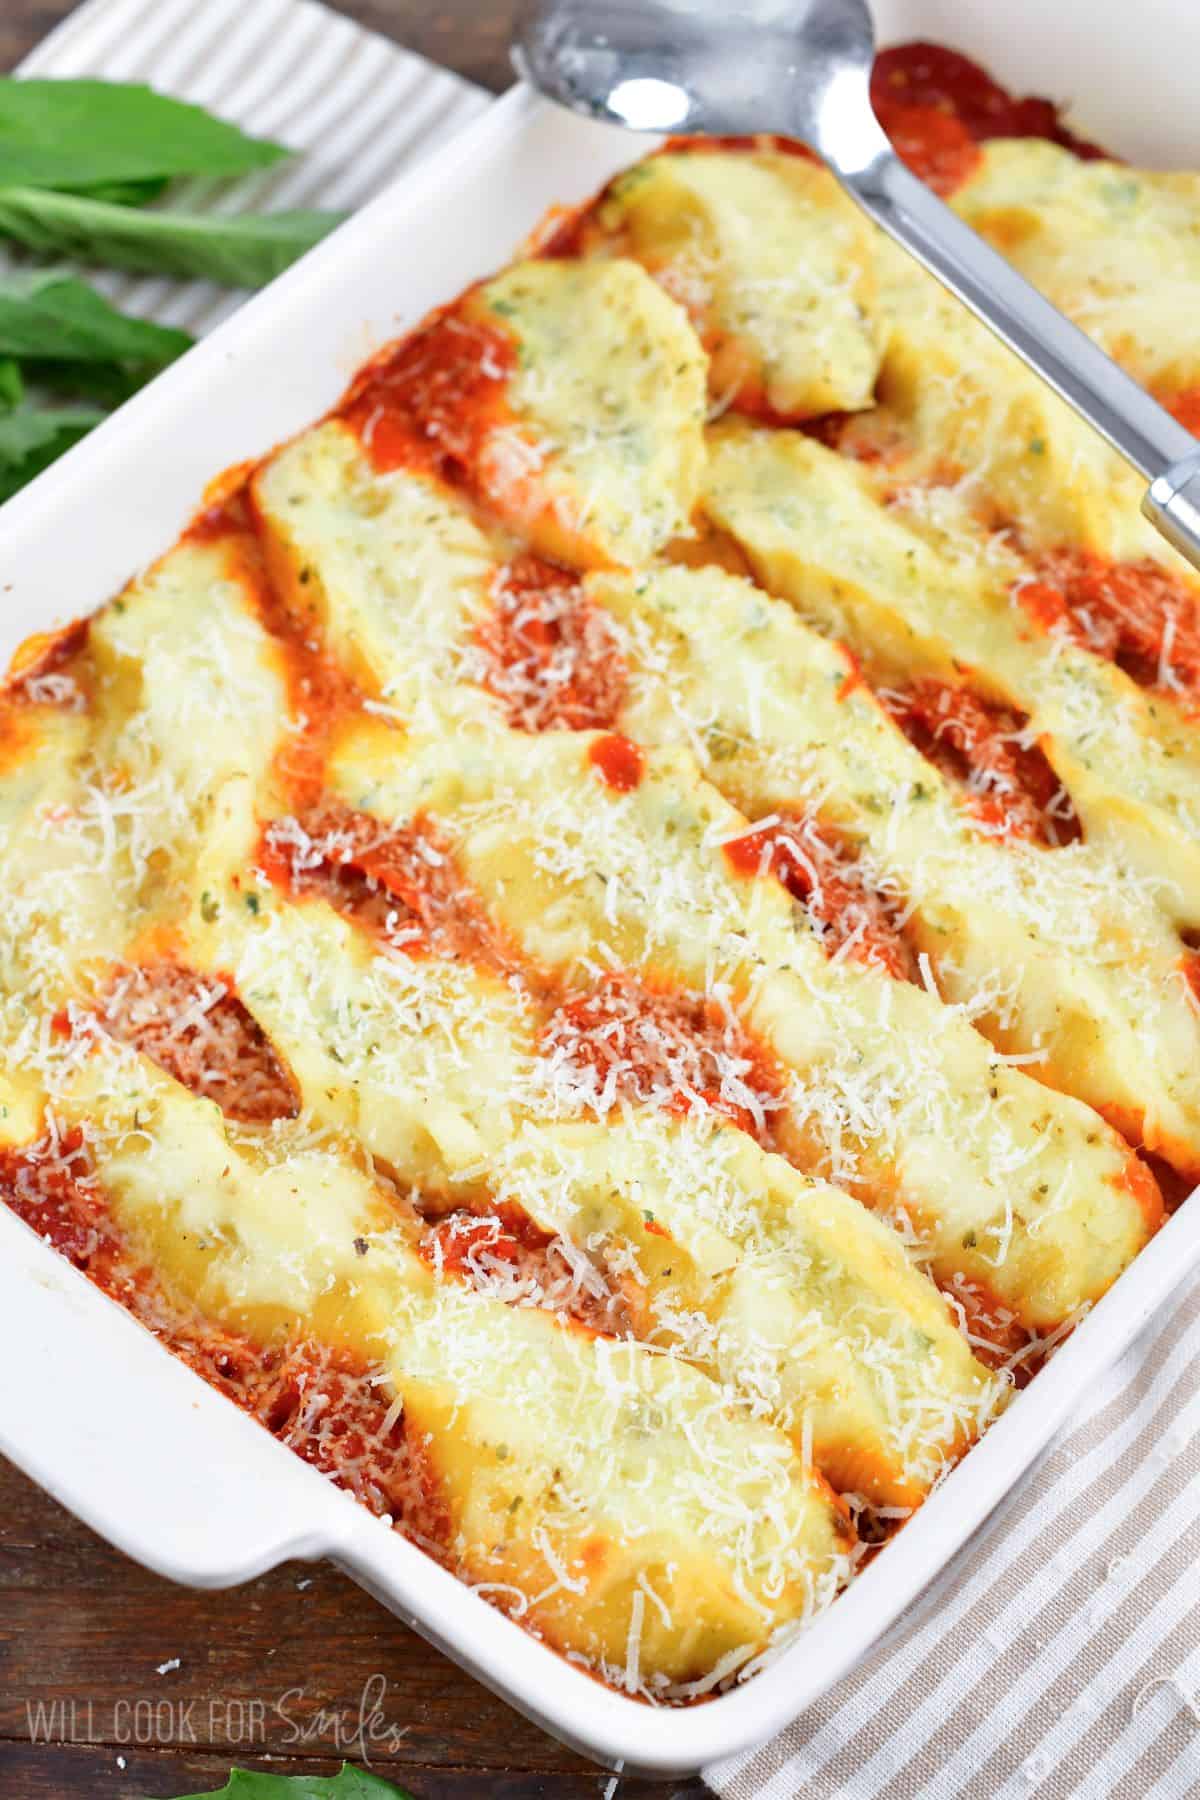 three rows of baked stuffed shells in marinara sauce in a white baking dish.